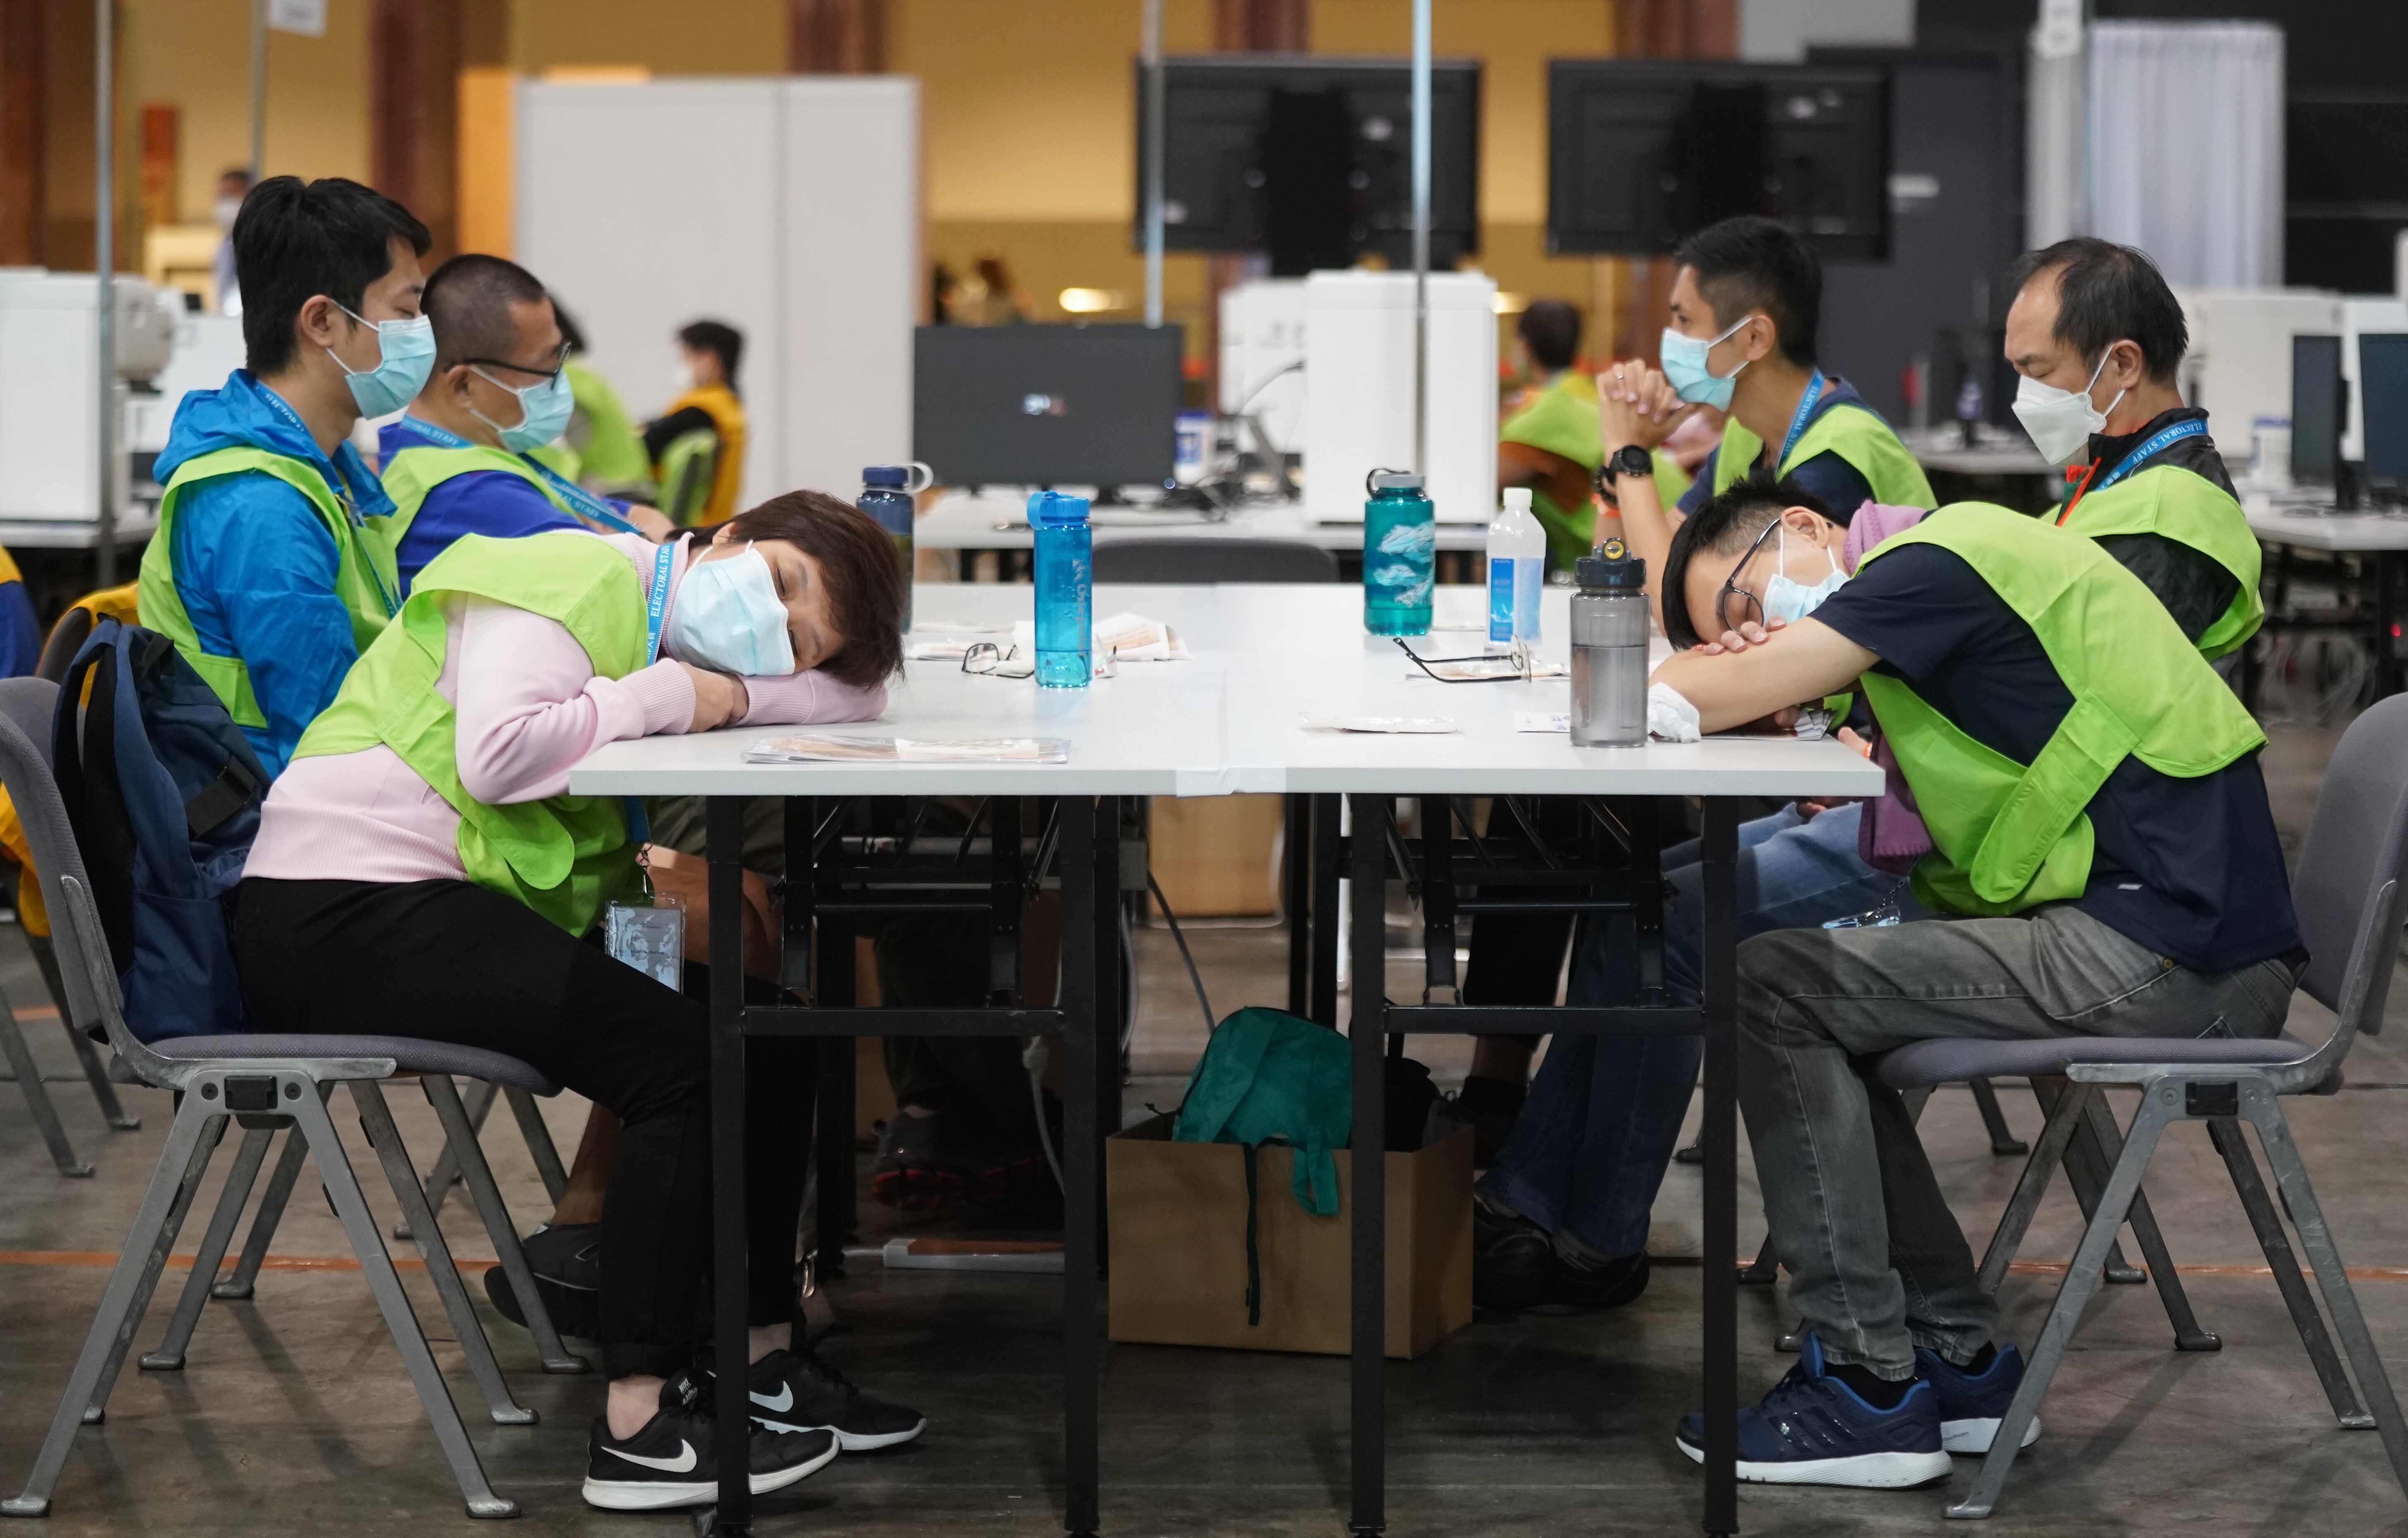 It was a long night for staff at the vote counting station. Photo: Sam Tsang